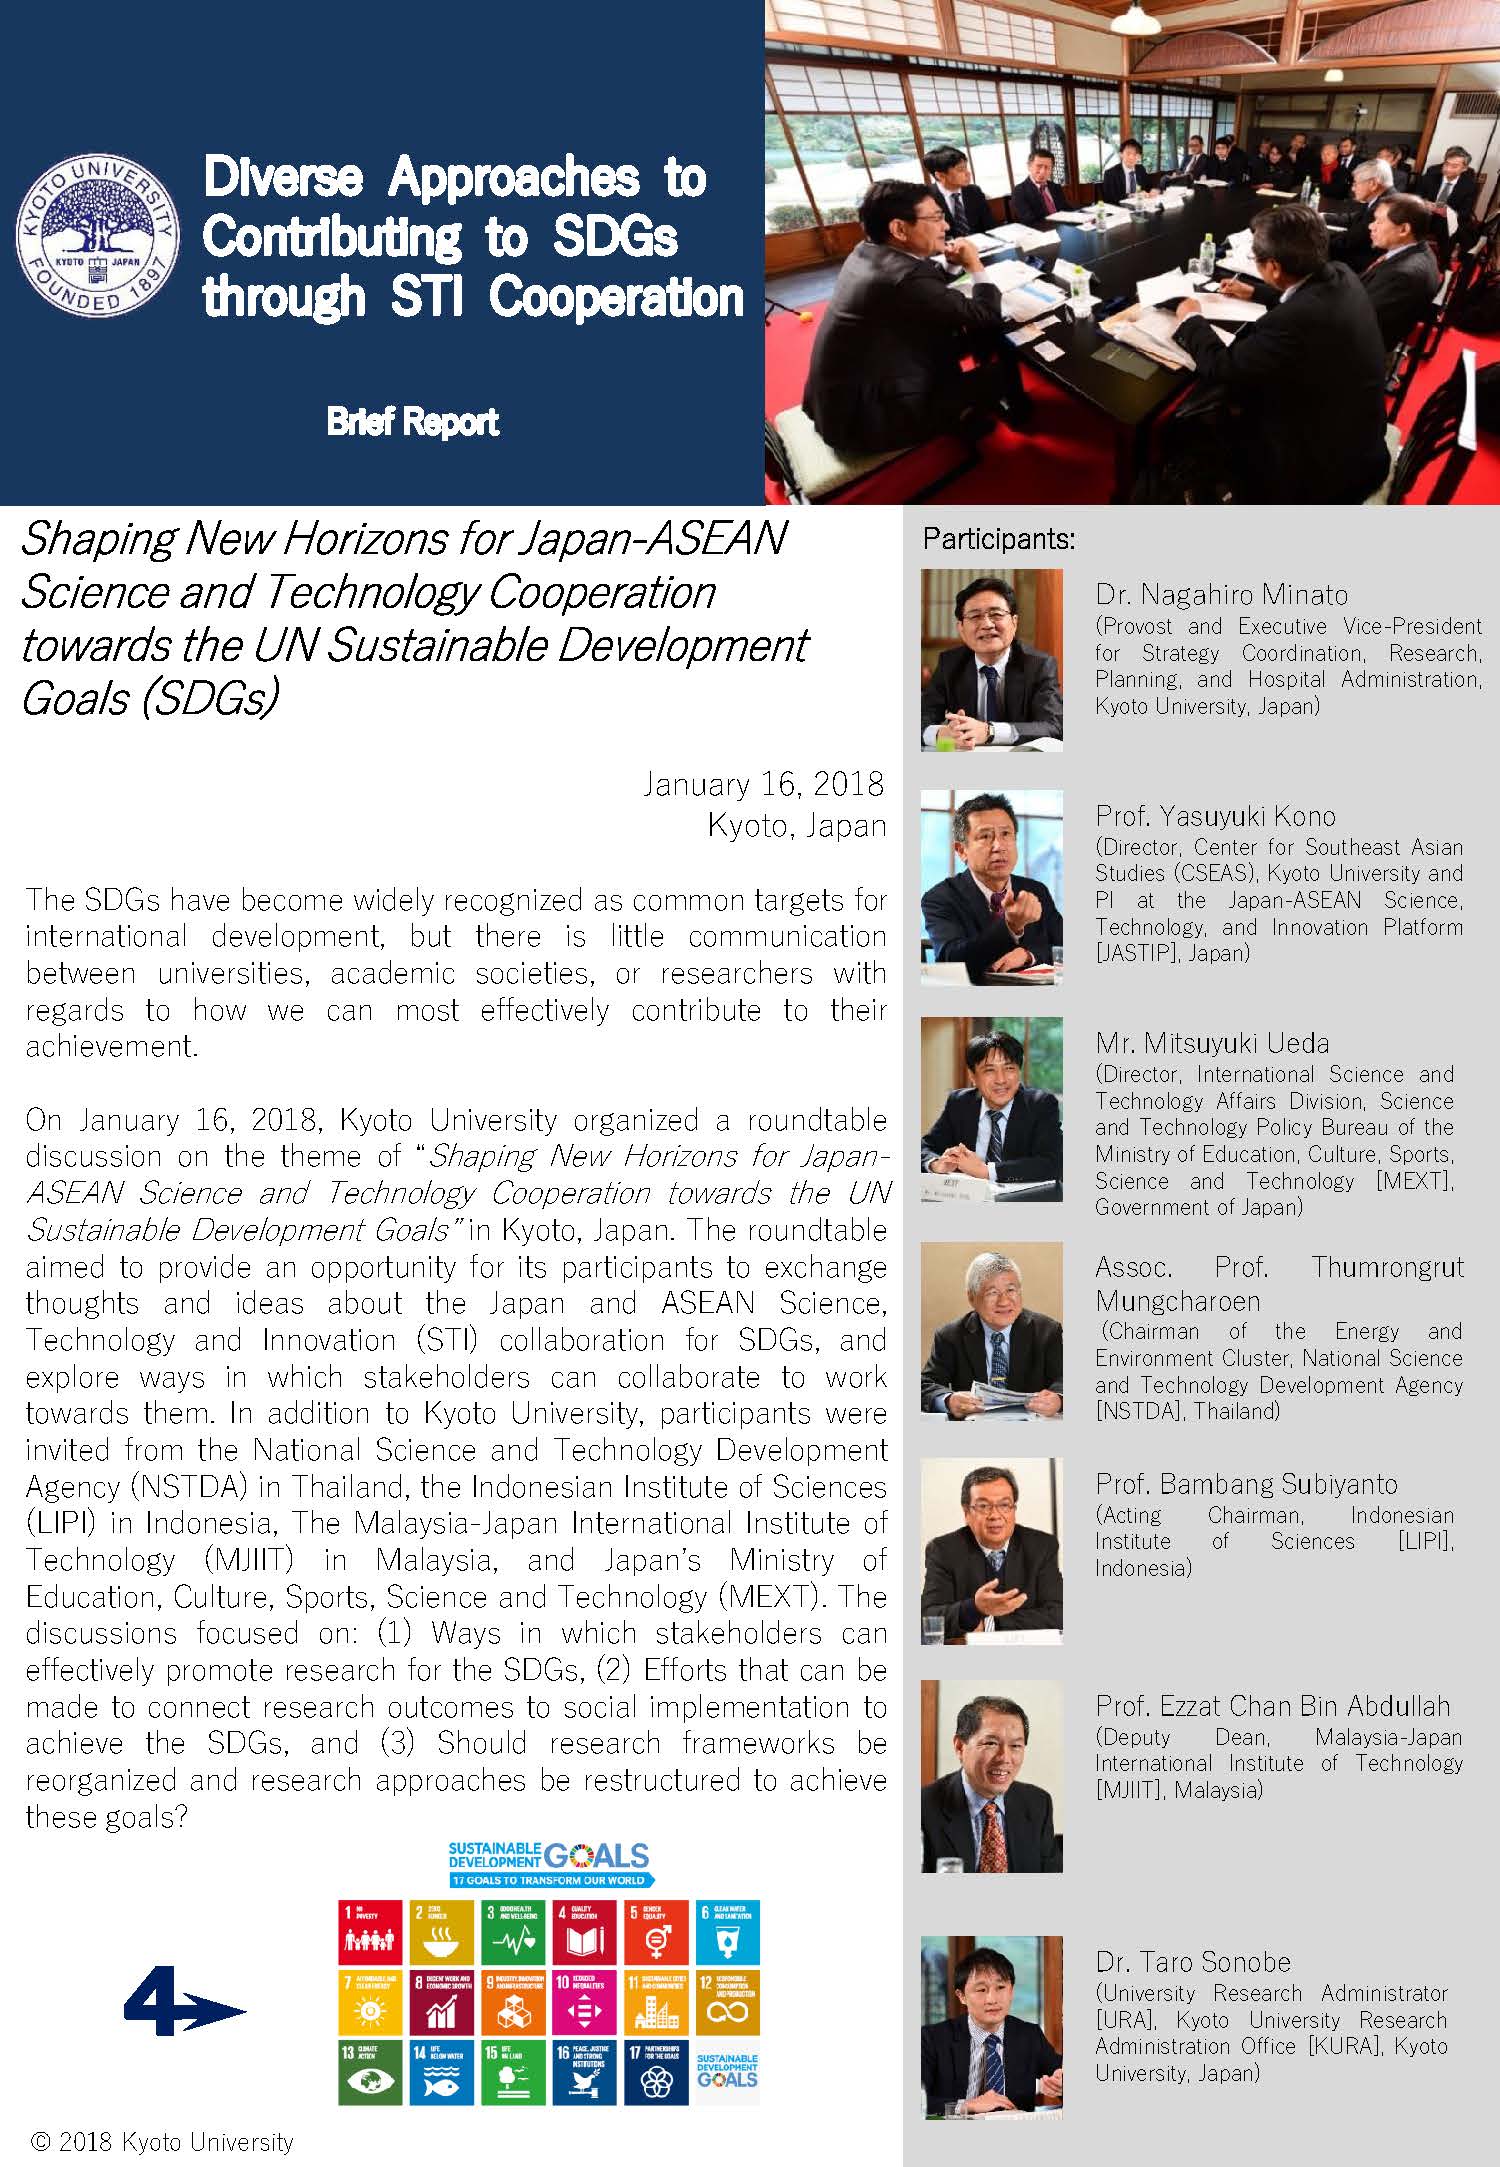 Roundtable Discussion “Shaping New Horizons for Japan-ASEAN Science and Technology Cooperation towards the UN Sustainable Development Goals” : Brief Report